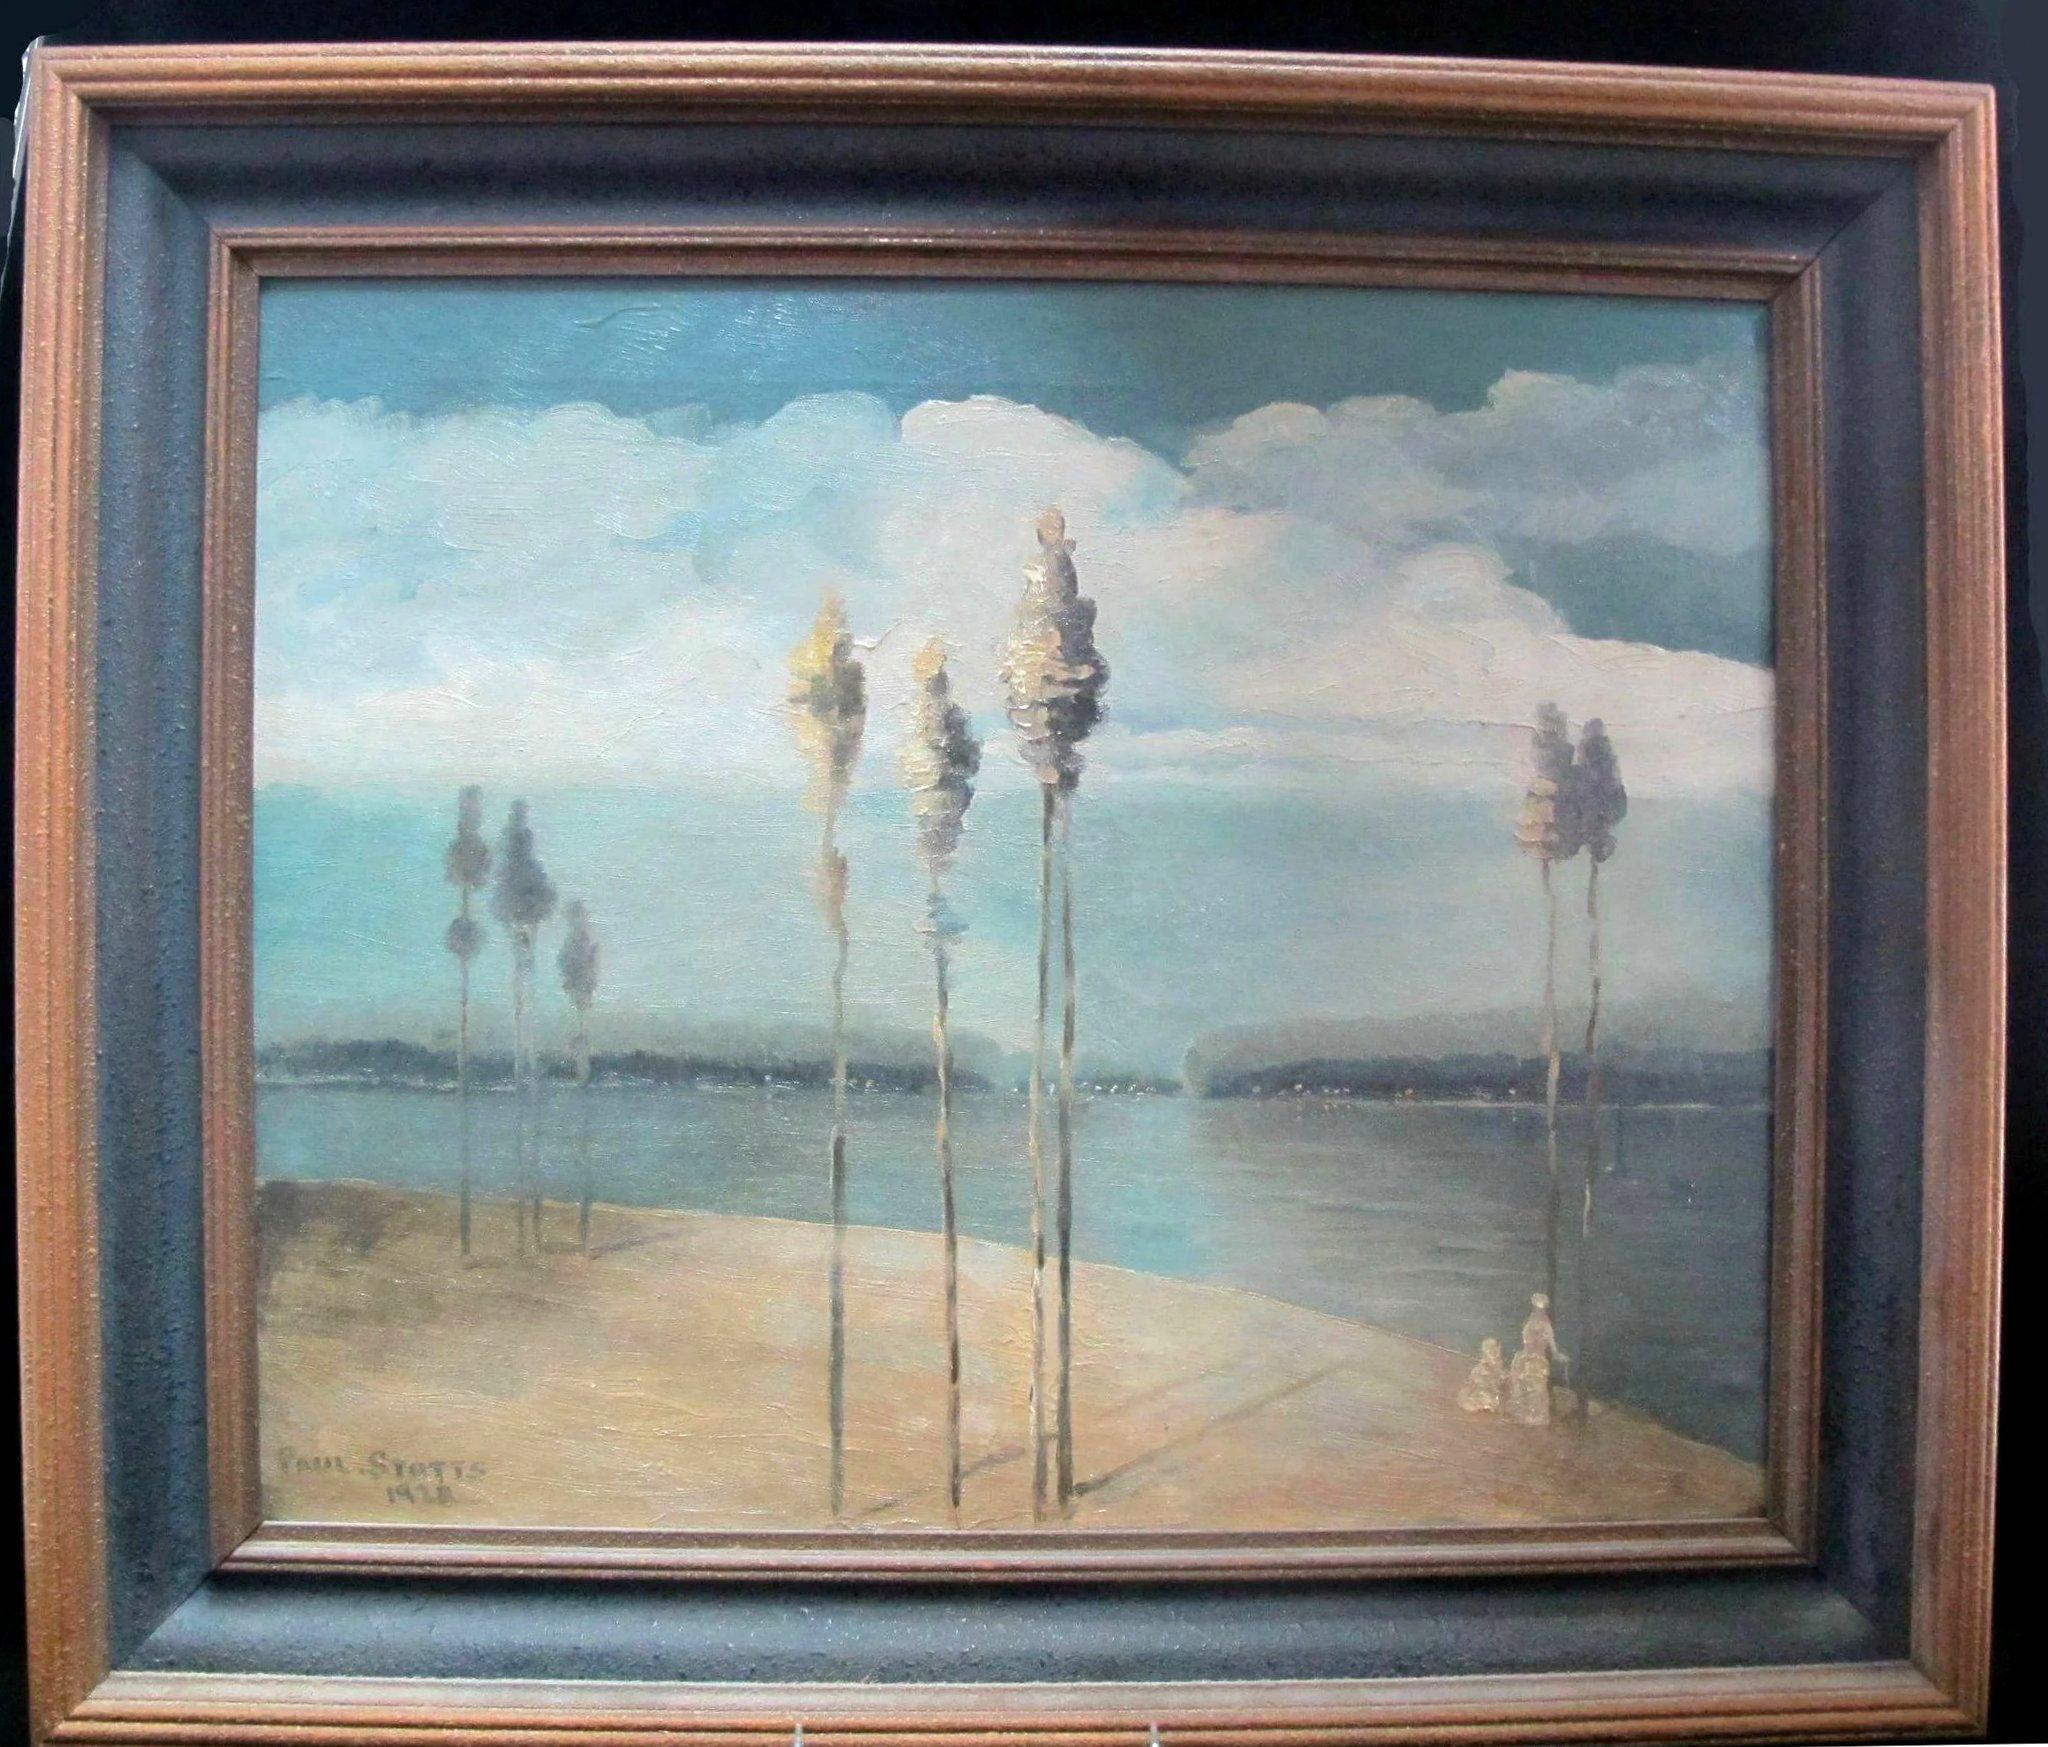 Paul M Stotts (Canada, 1872).

Original oil painting on canvas of coastal trees, circa 1928. A woman and child stand to peer into the water at the bottom right. Signed at lower left. Frame measures 28